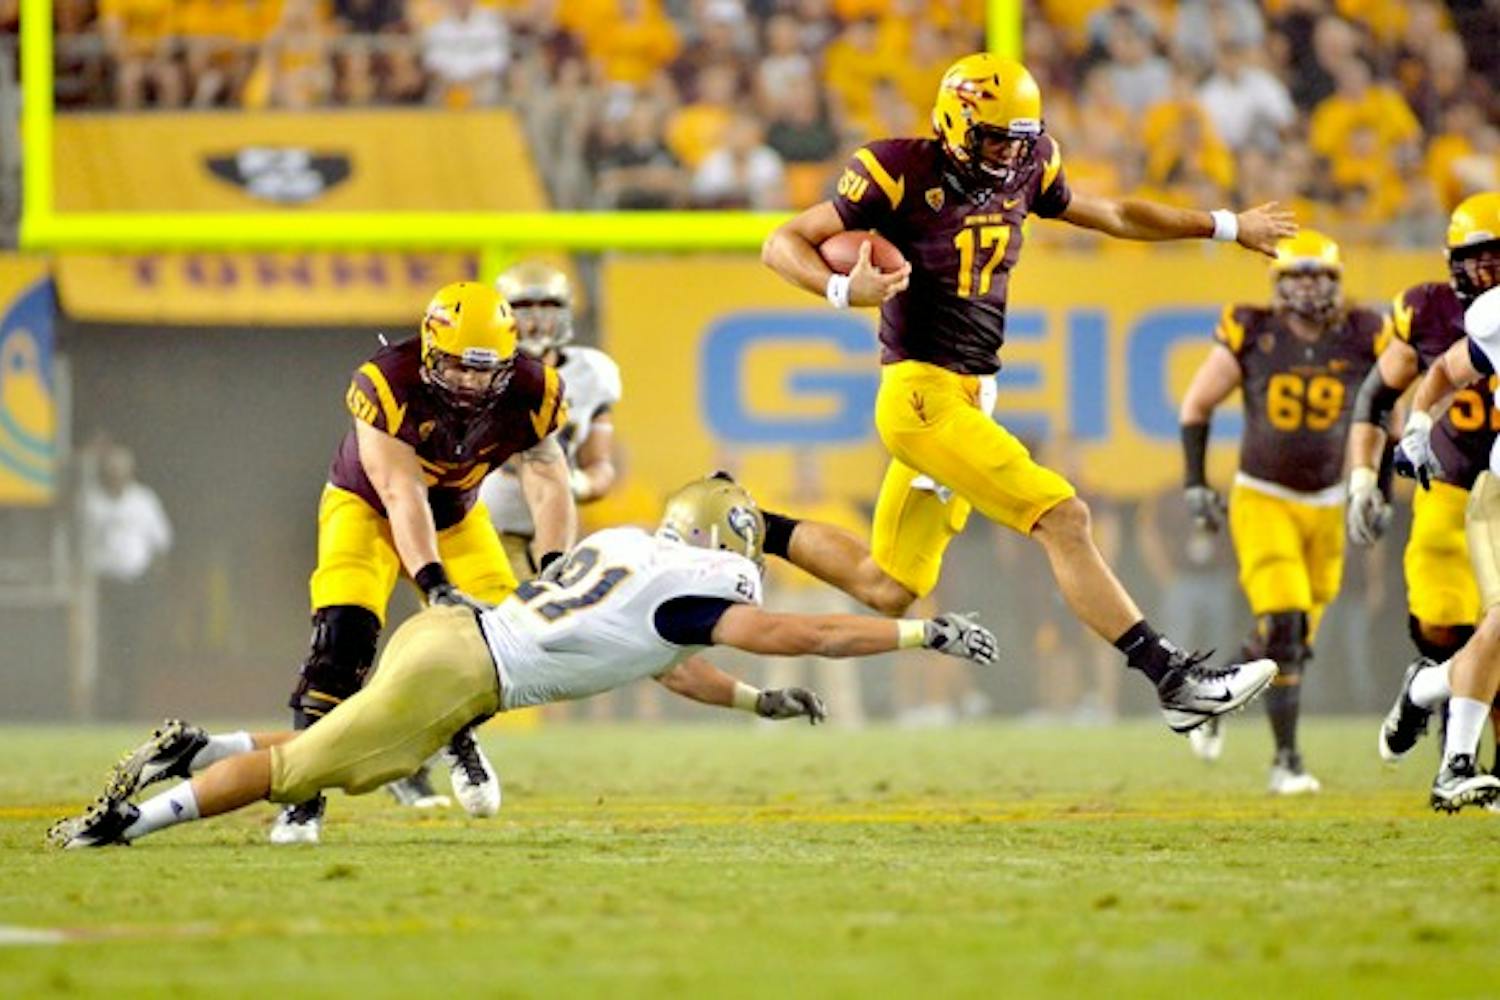 TIGER WATCHING: ASU junior quarterback Brock Osweiler evades a tackle as he runs up field during the Sun Devils’ demolition of UC Davis on Sept. 1. Osweiler said on Monday the intensity of Mizzou’s defensive line would be the Sun Devils’ biggest challenge. (Photo by Aaron Lavinsky)